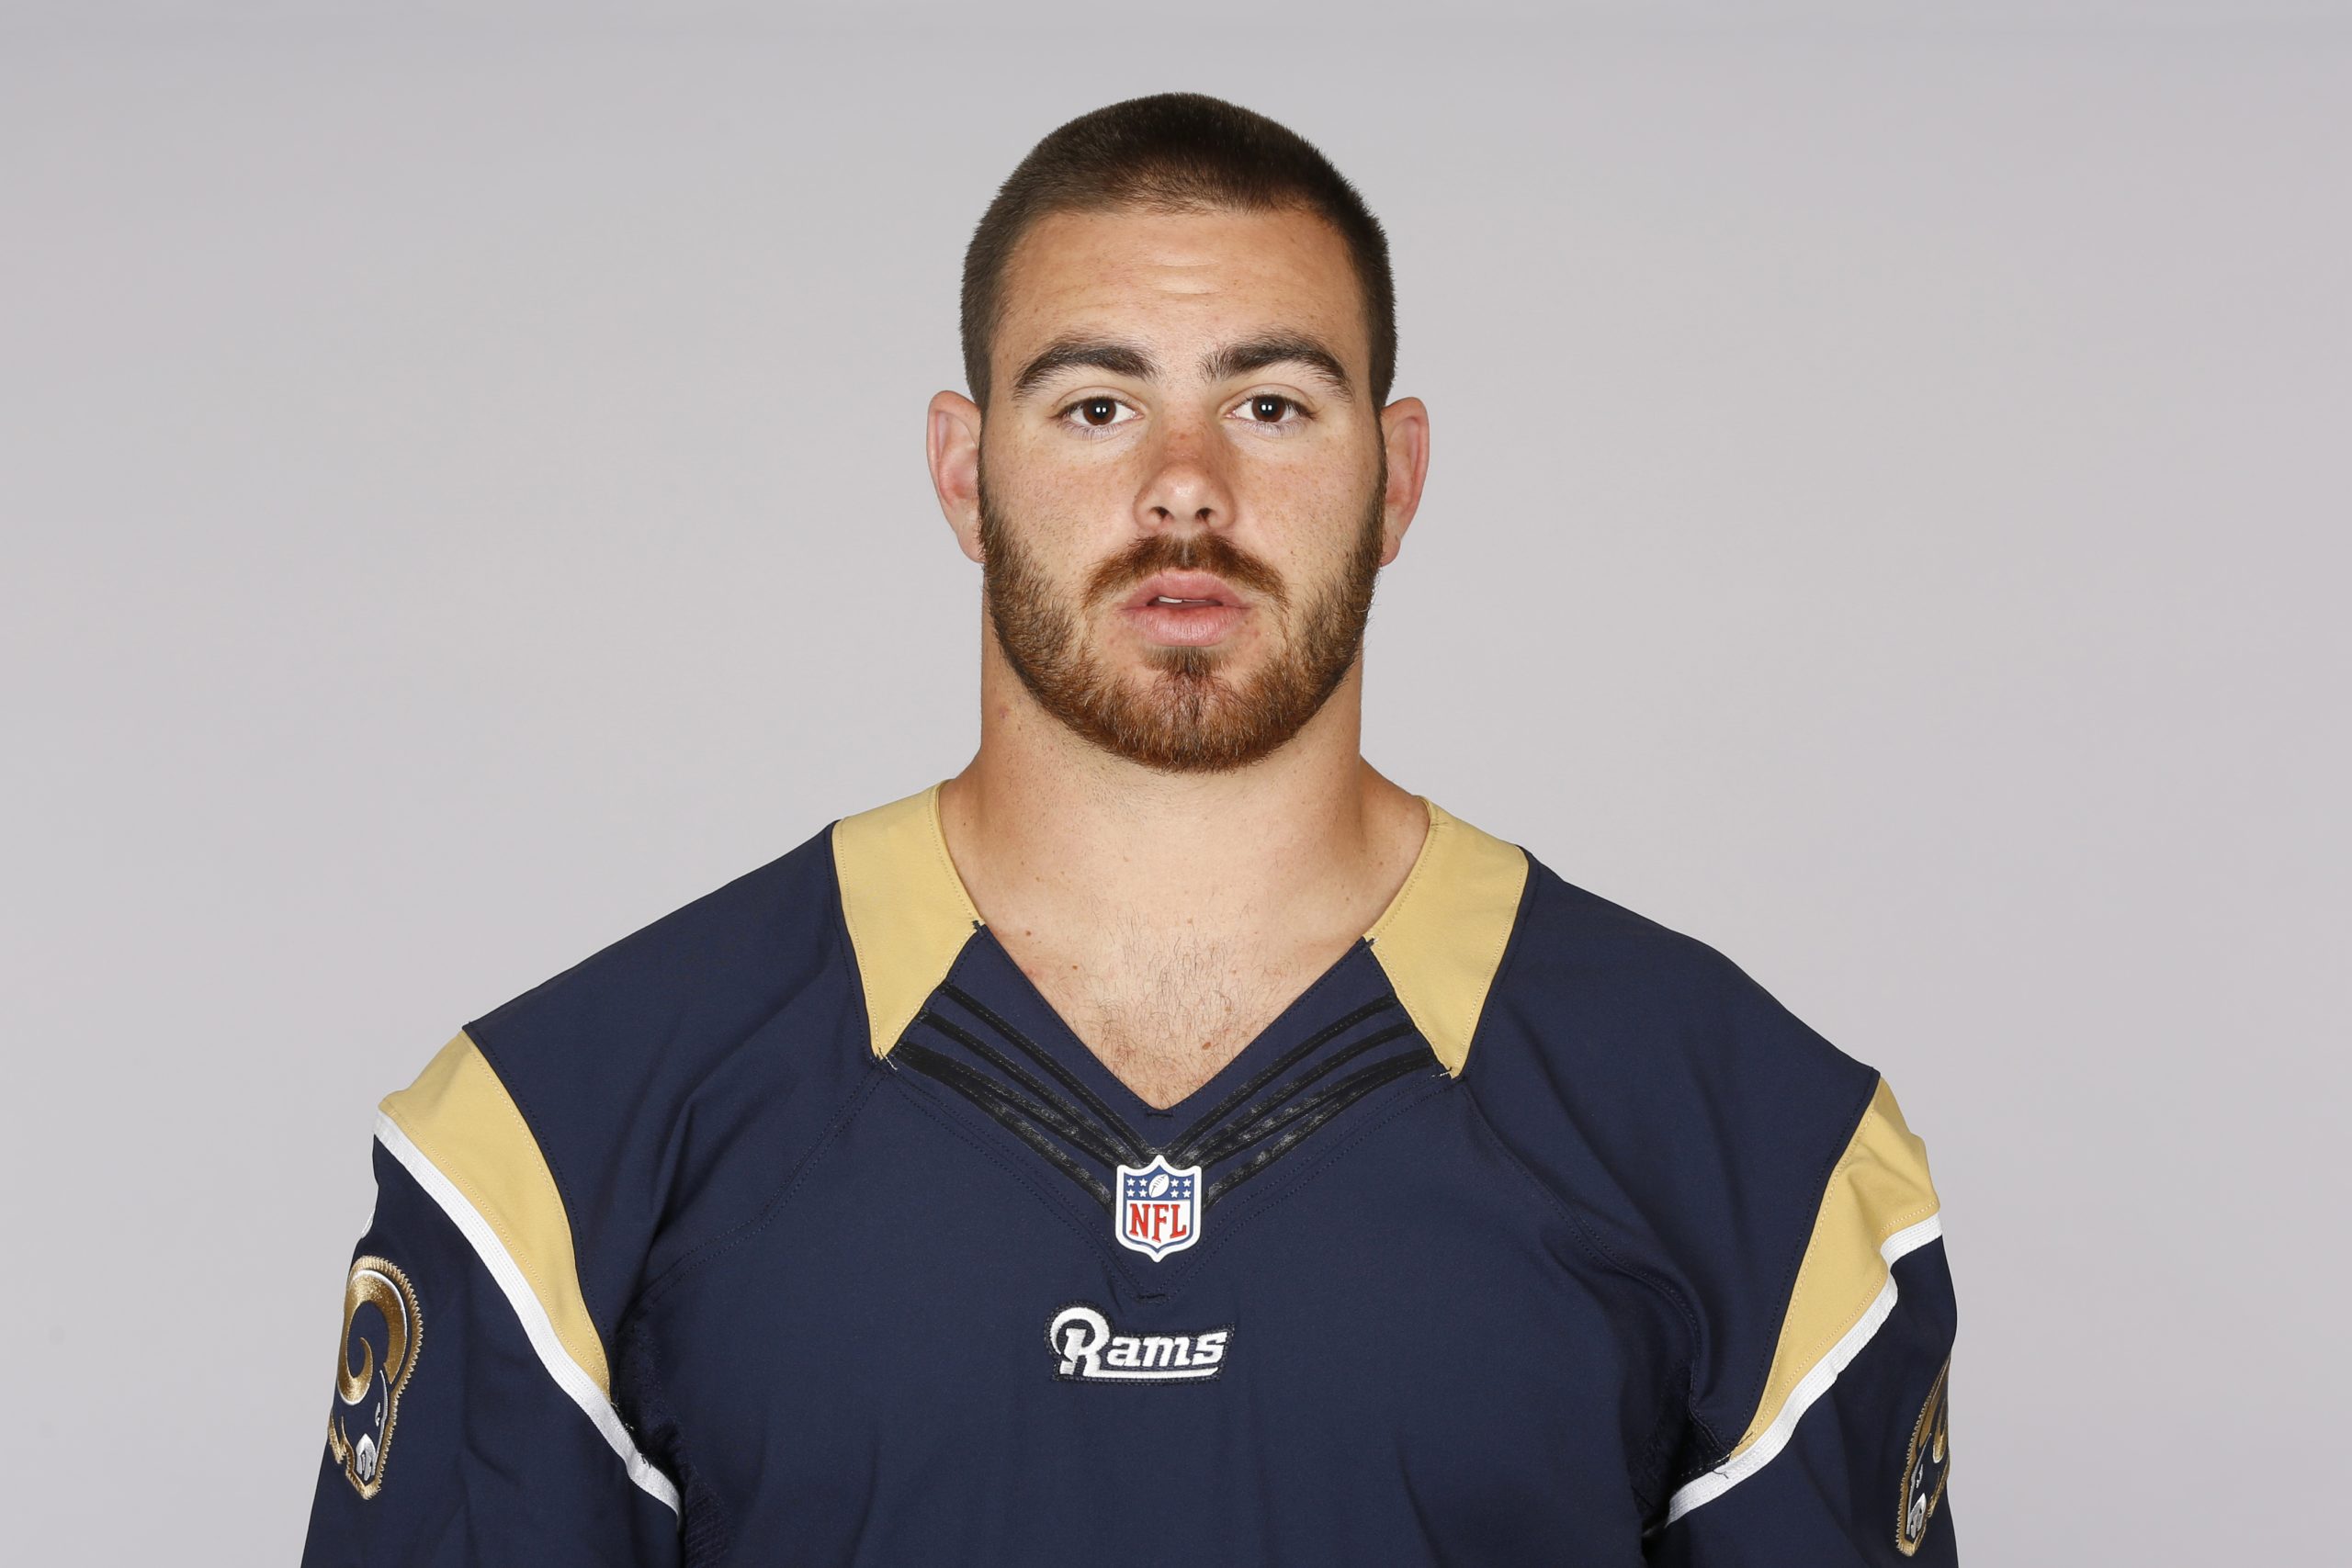 Rams Signed Tight End Tyler Higbee to a Two-year, $27 Million Contract